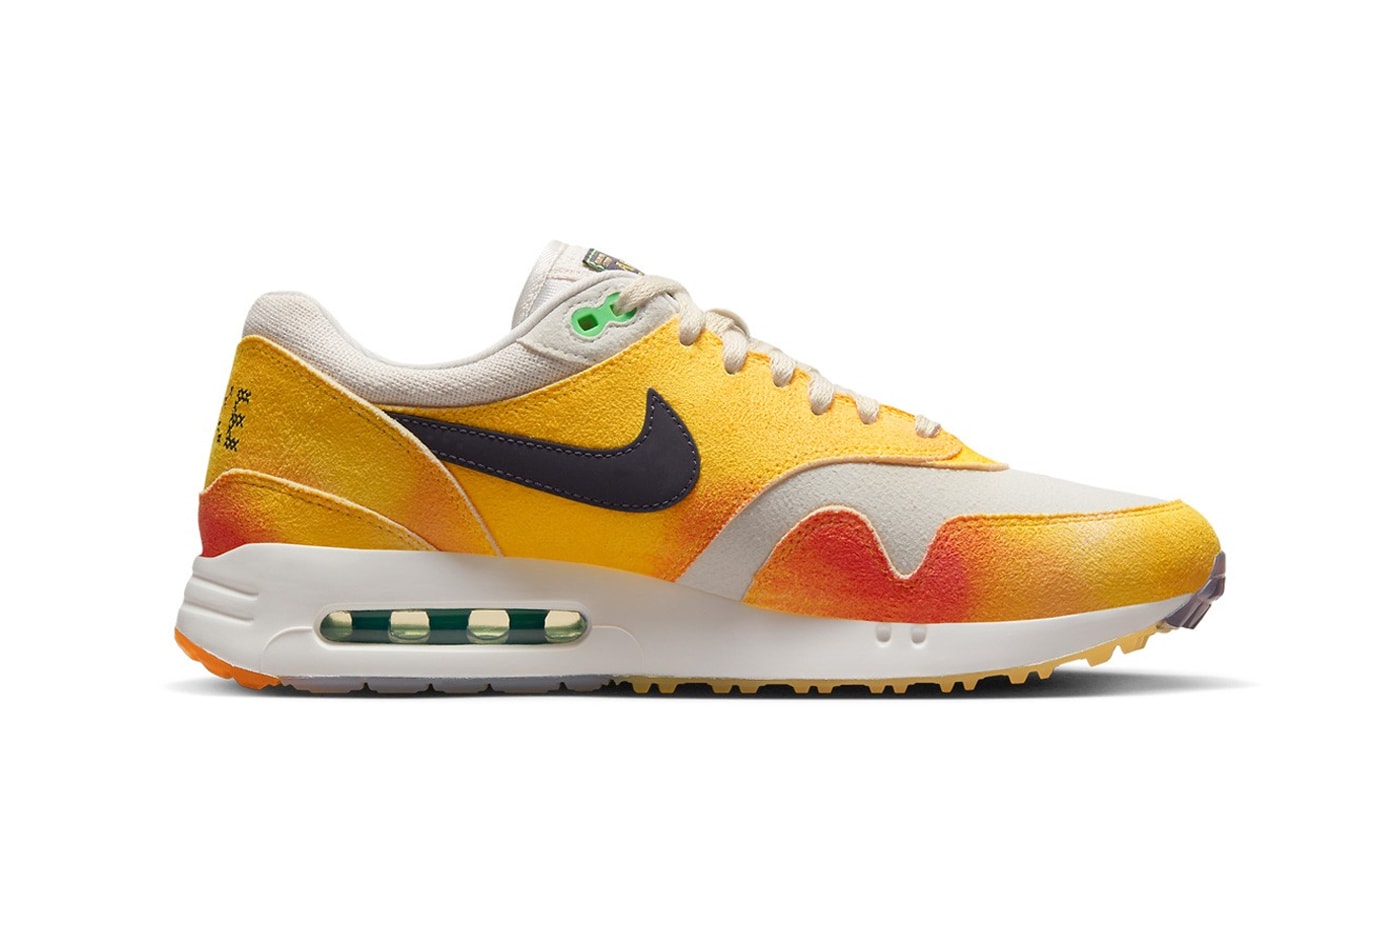 nike air max 1 golf masters tournament always fresh dv6802 007 release date information